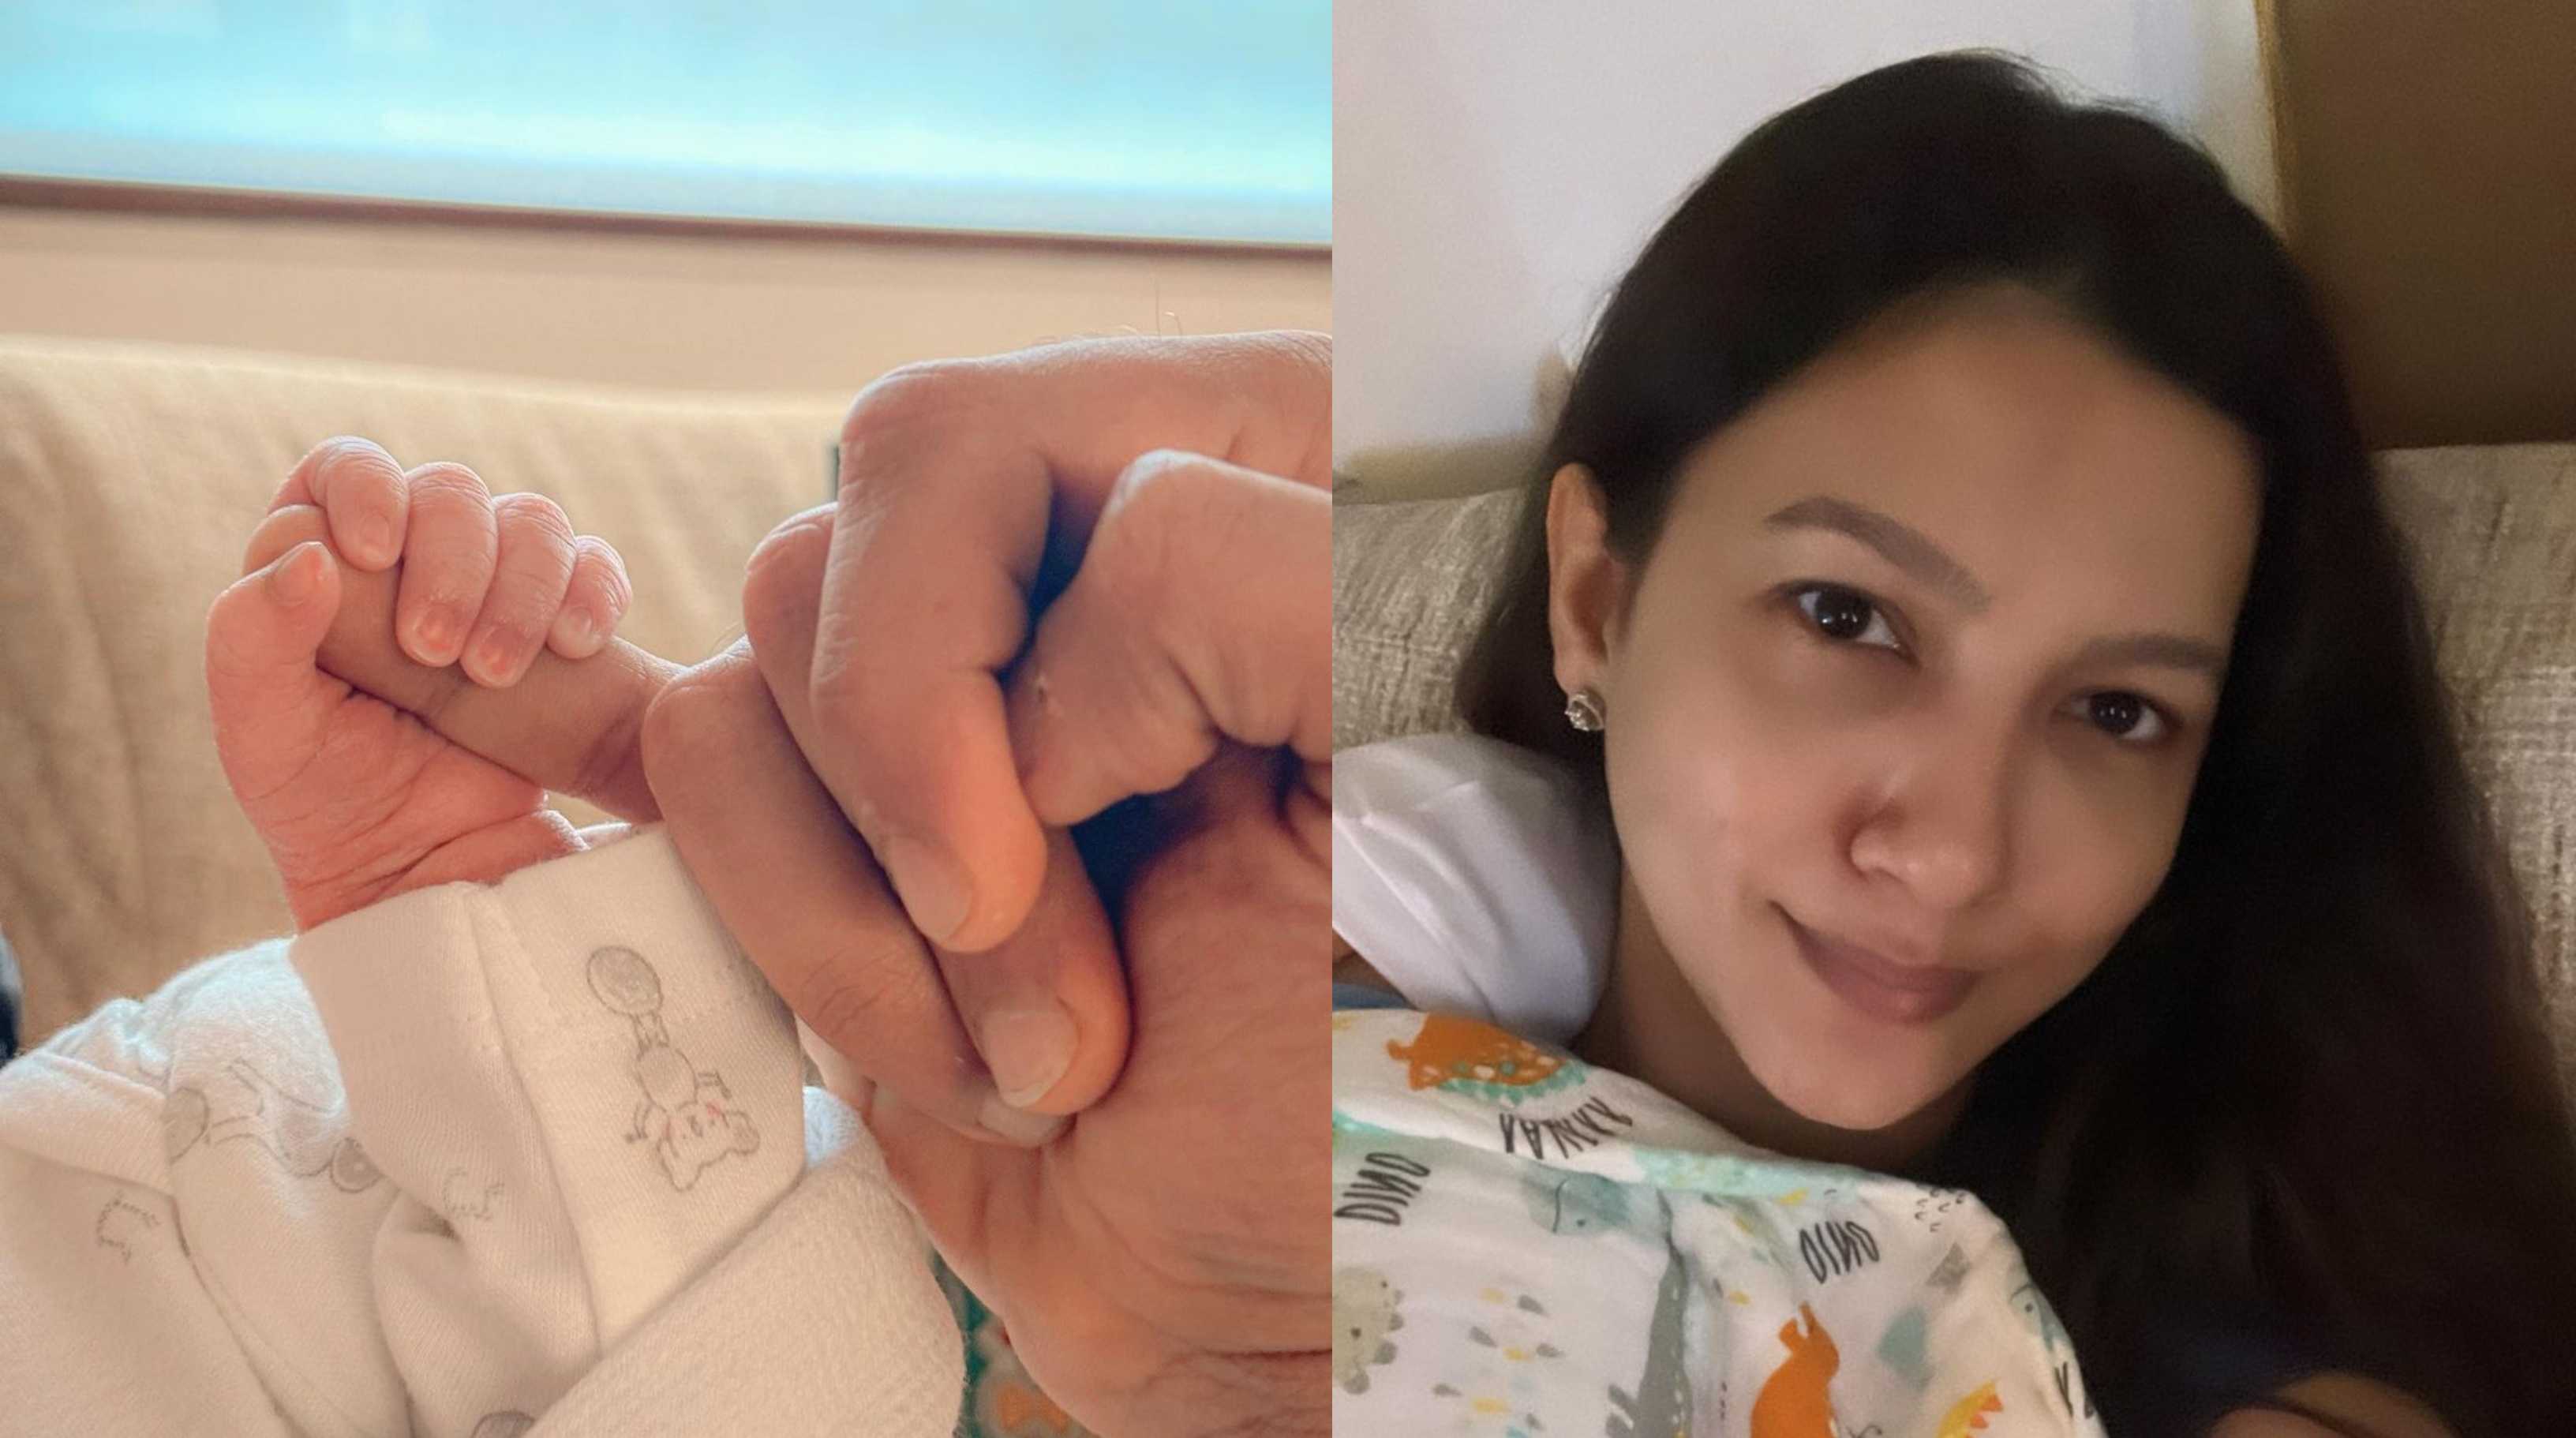 Gauahar Khan shares first picture with her son as a new mother; fans say ‘Mom glow doesn’t need glam’